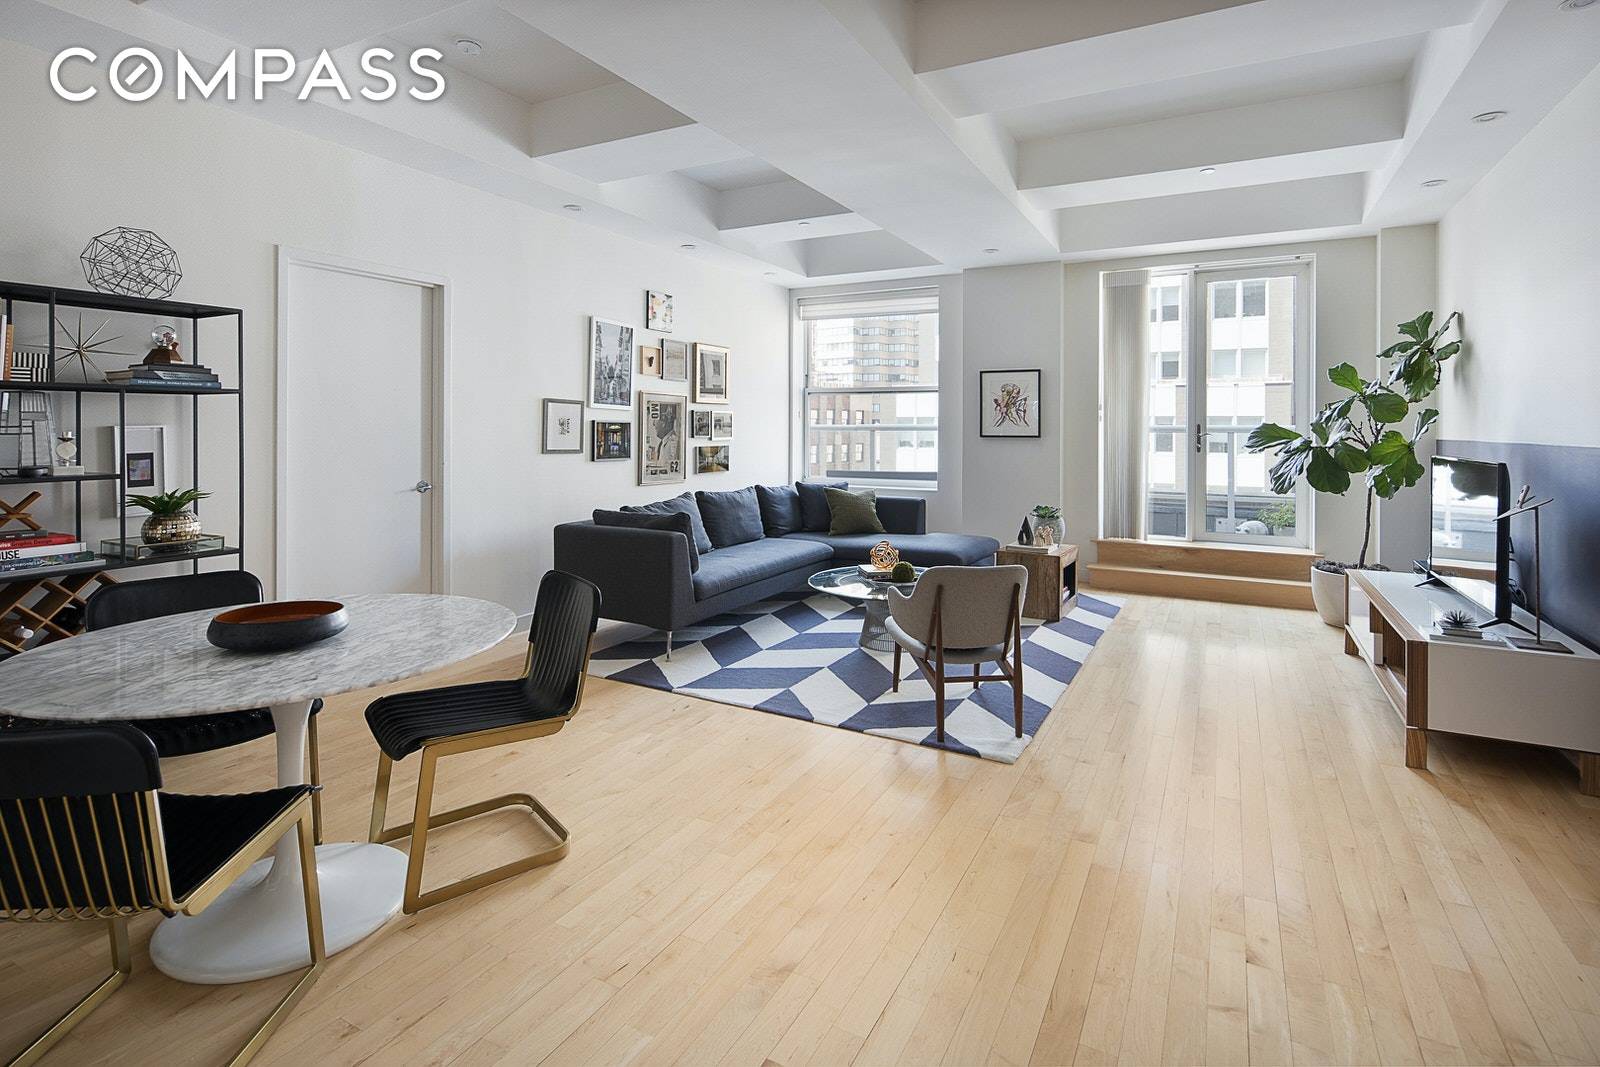 THE APARTMENT Apartment 2416 is a 1476sf loft with one of the most highly sought after layouts in 15 Broad Street, thanks to its function, style and comfort.